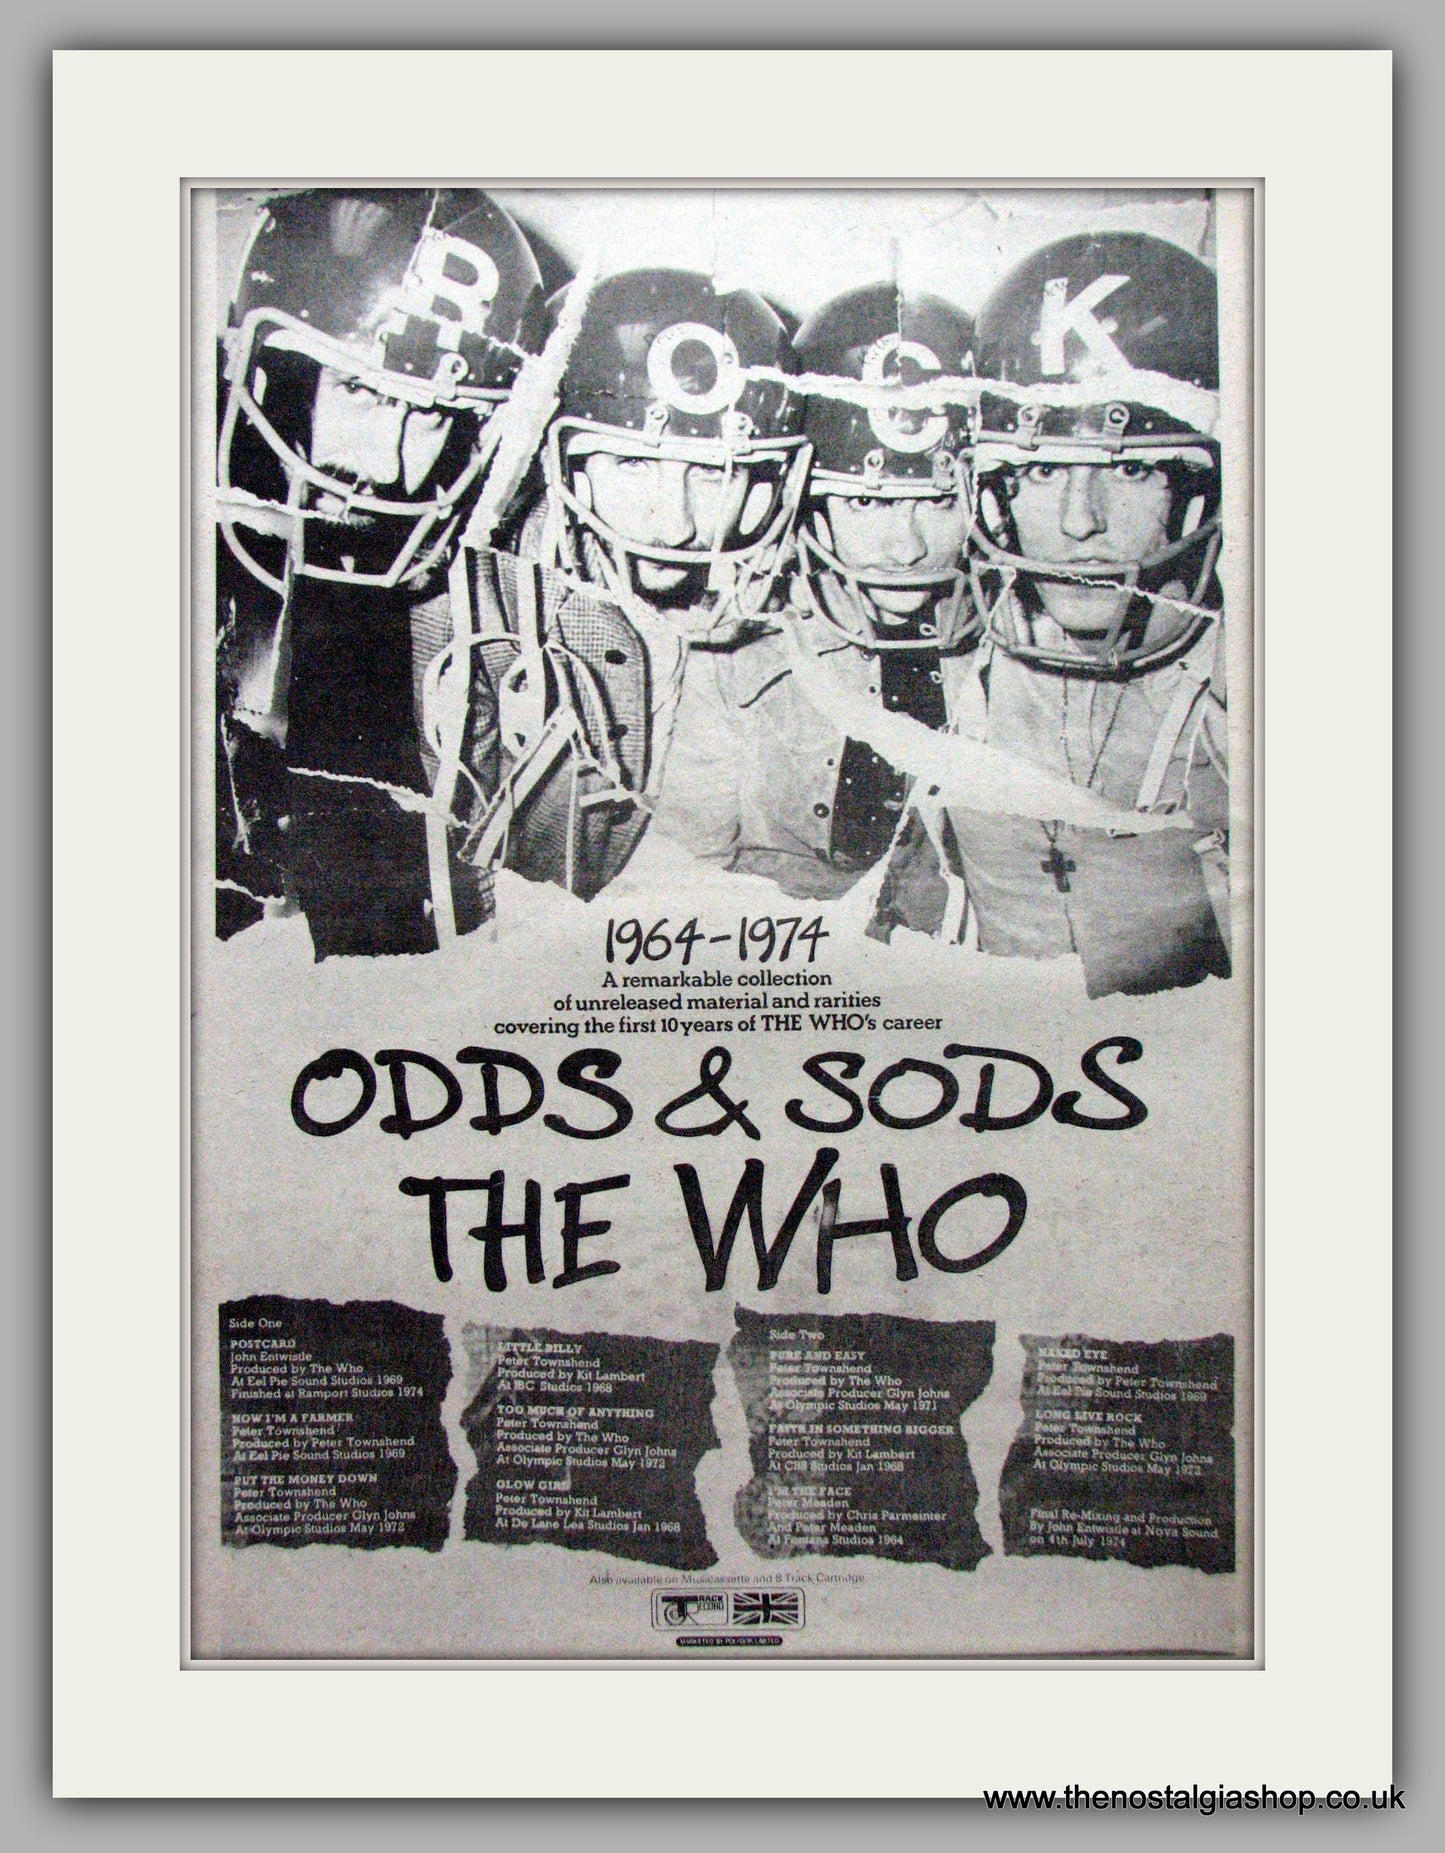 Who (The) Odds and Sods 1964-1974. Vintage Advert 1974 (ref AD9559)